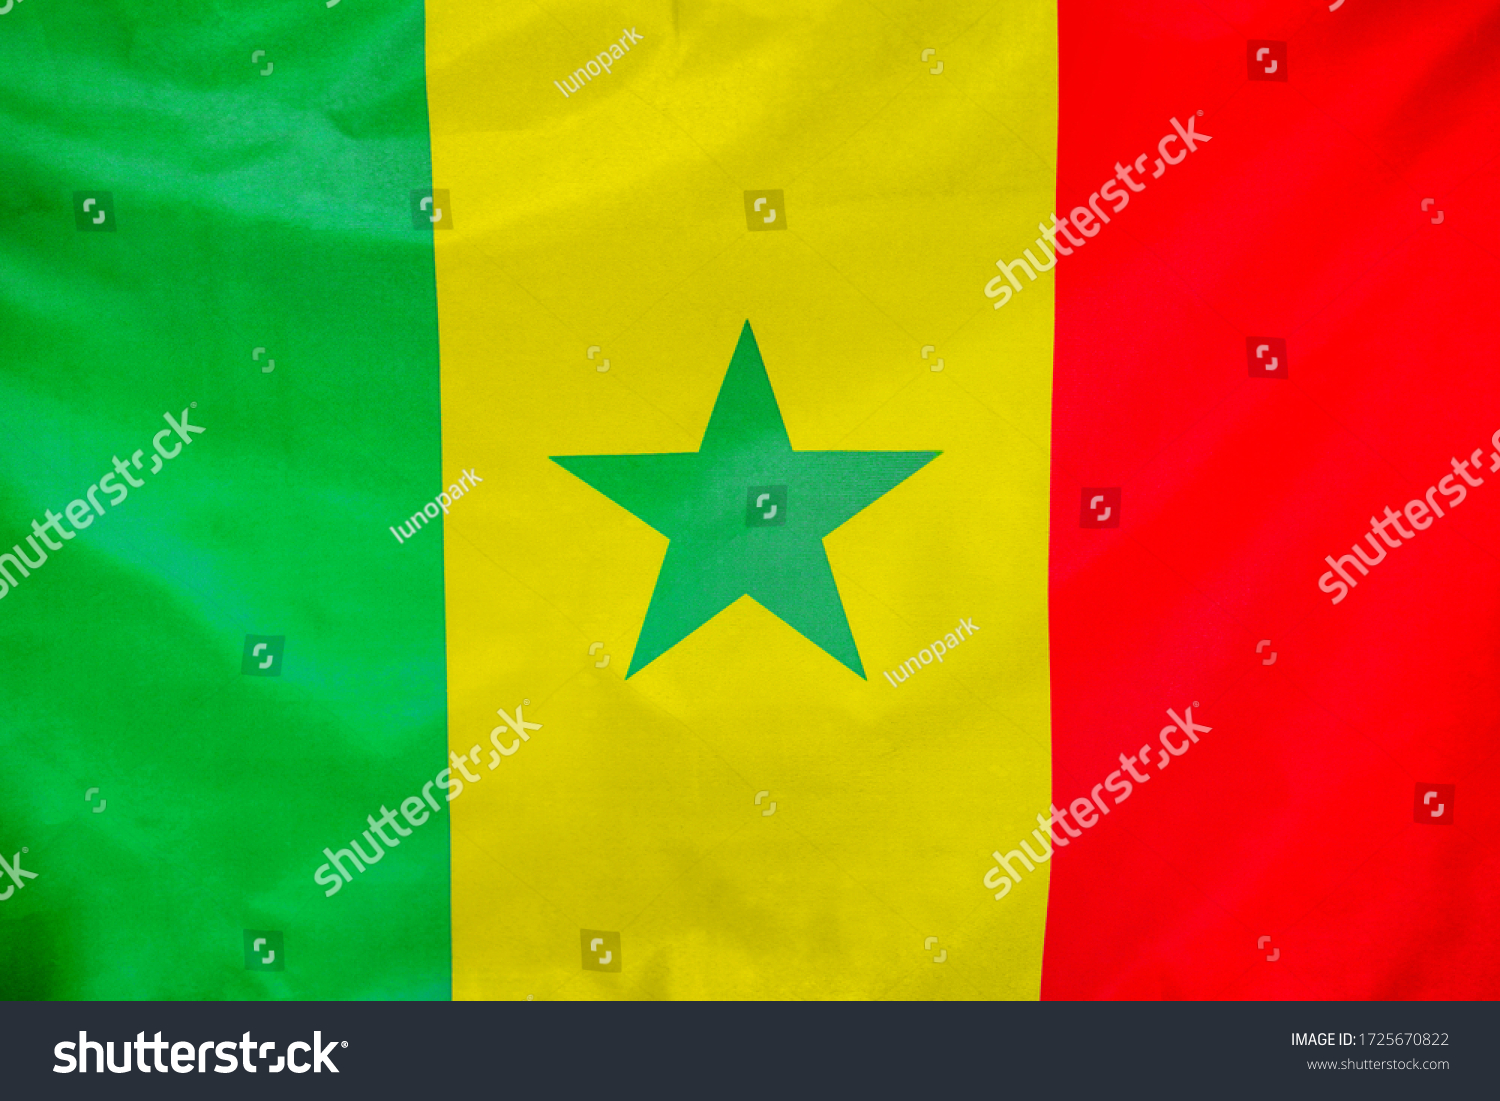 Fabric texture flag of Senegal. Flag of Senegal waving in the wind. Senegal flag is depicted on a sports cloth fabric with many folds. Sport team banner. #1725670822